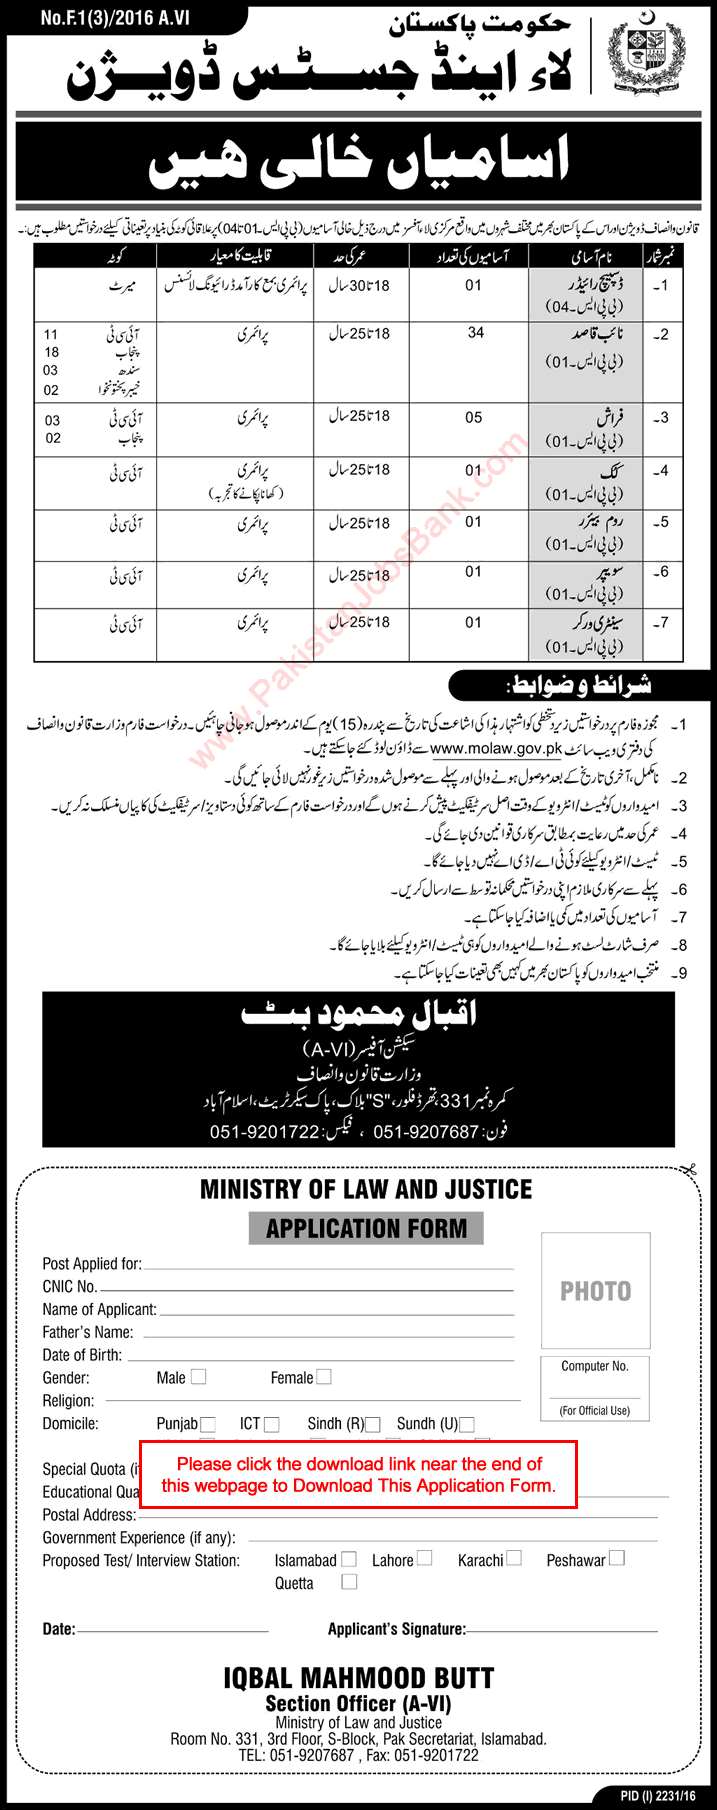 Ministry of Law and Justice Jobs November 2016 Application Form Naib Qasid, Frash & Others Latest